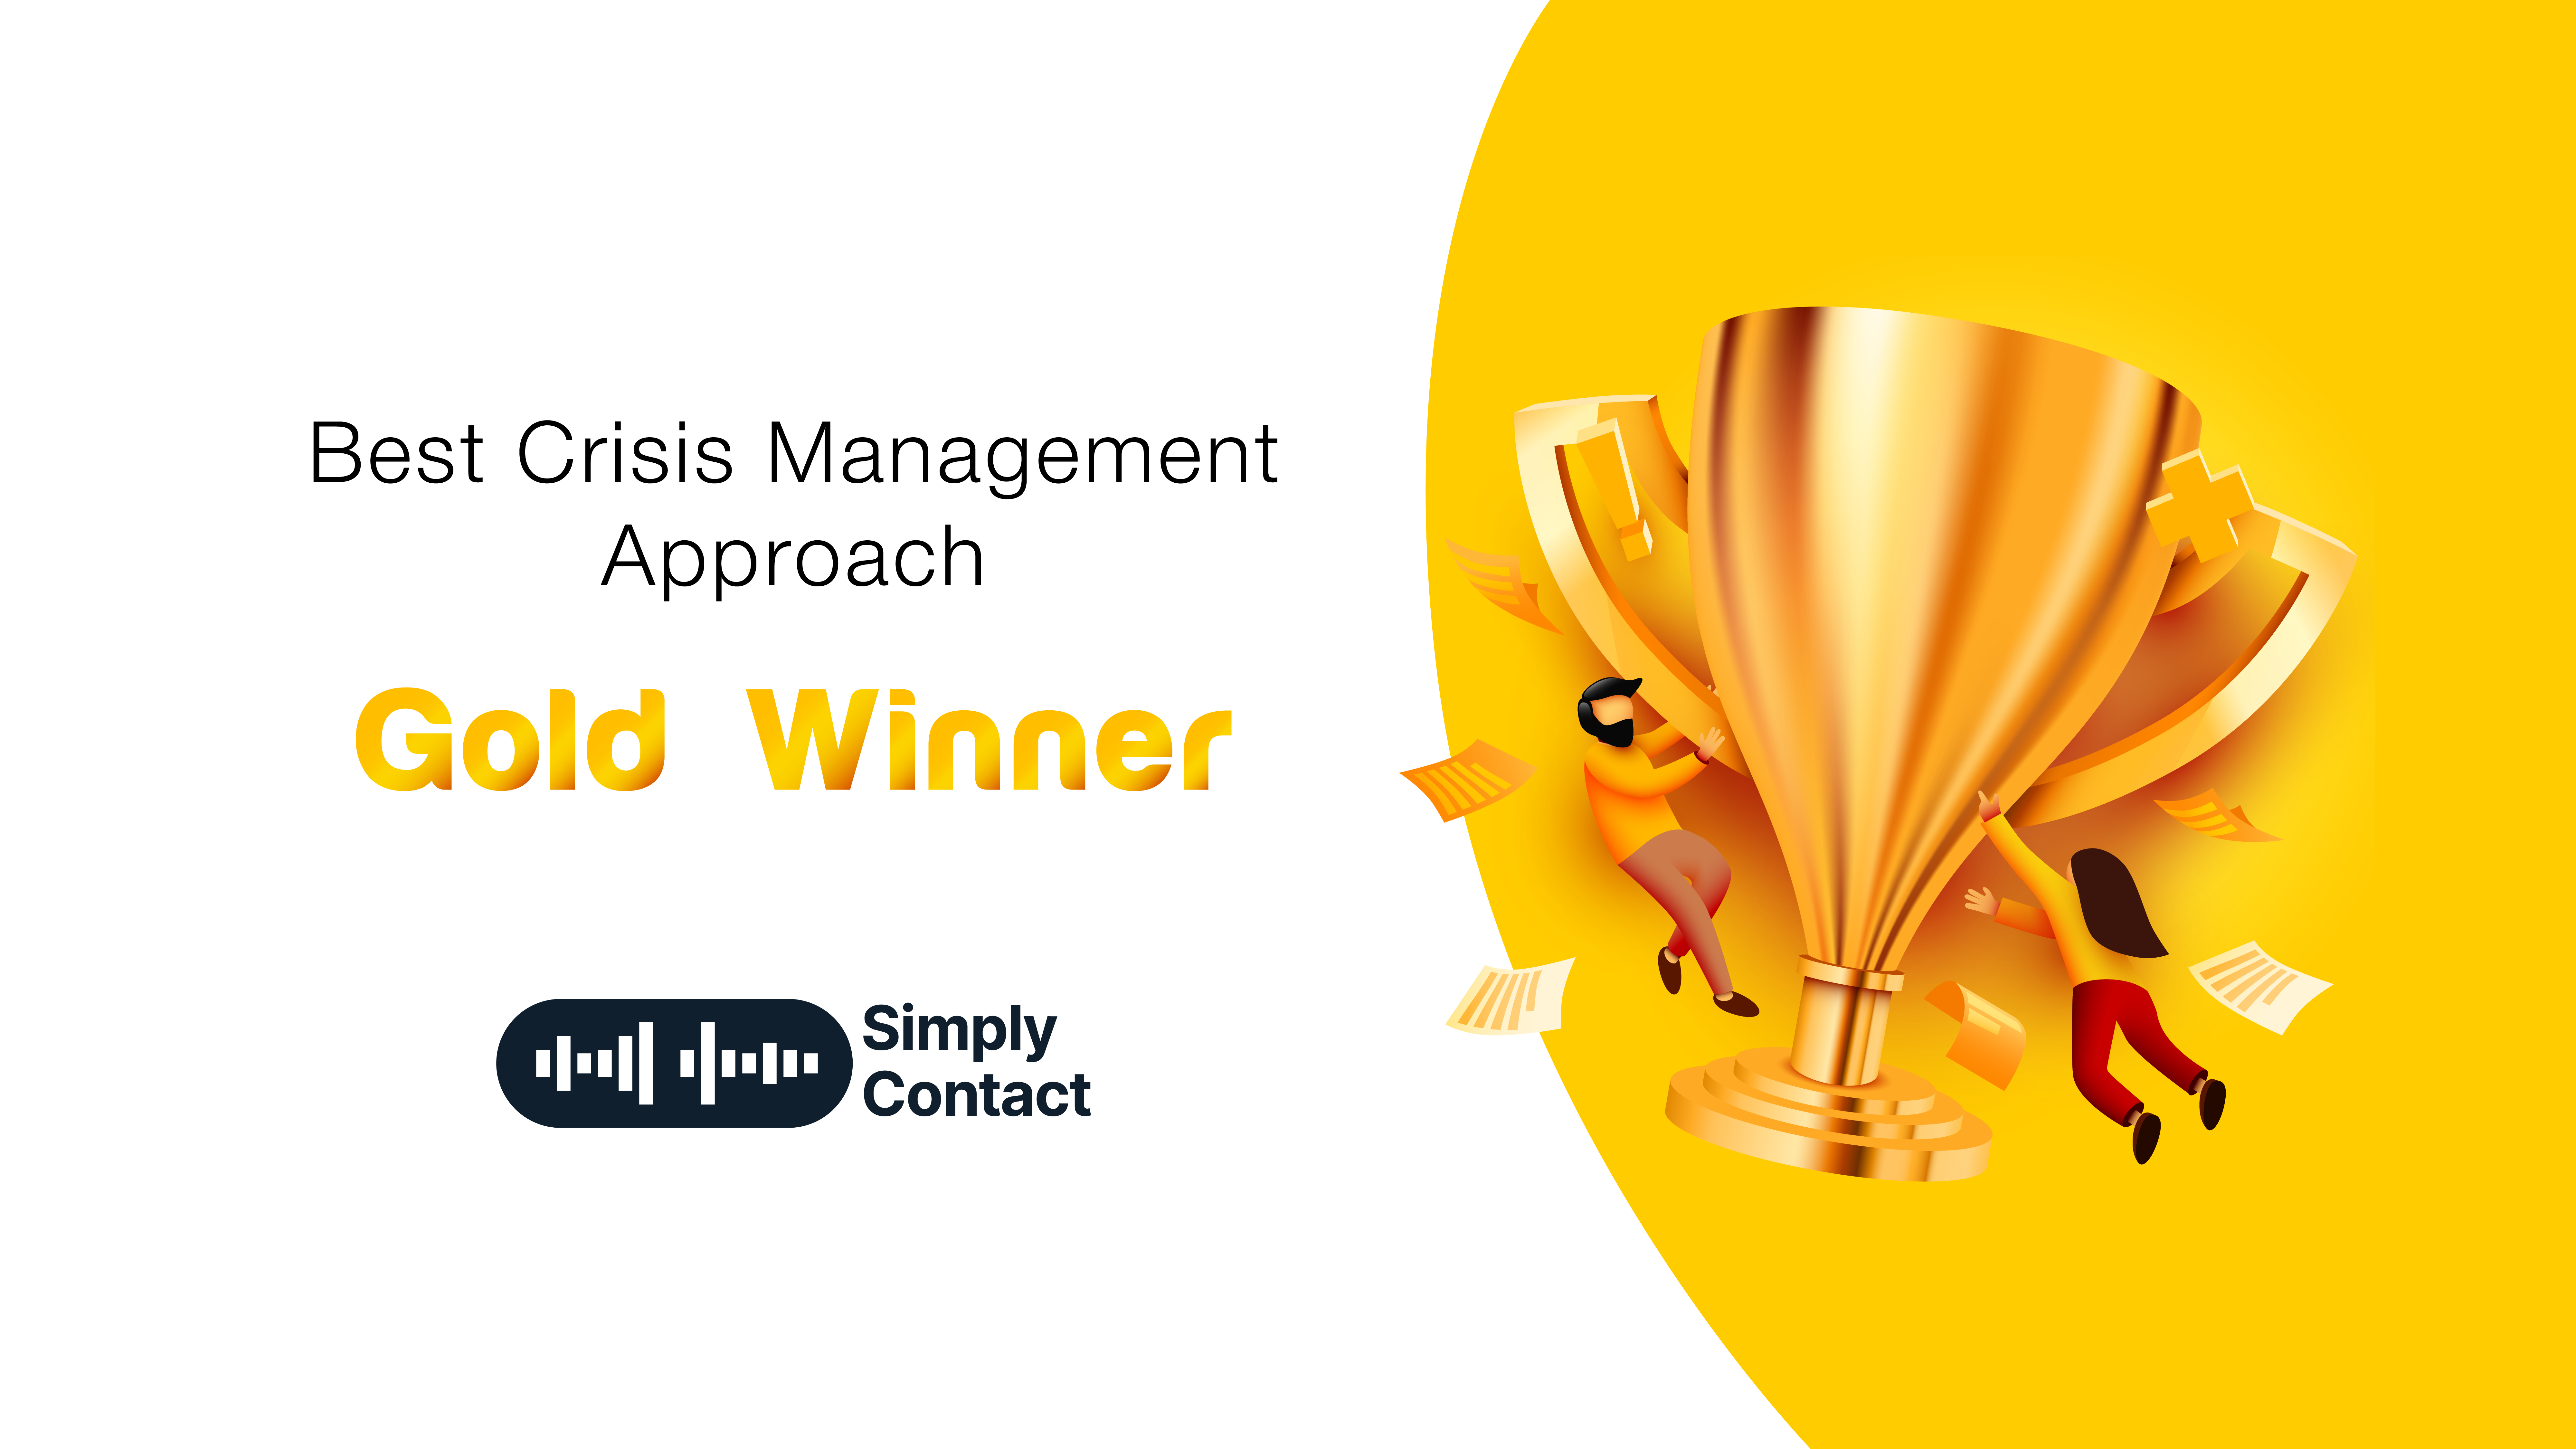  The Best Approach to Crisis Management